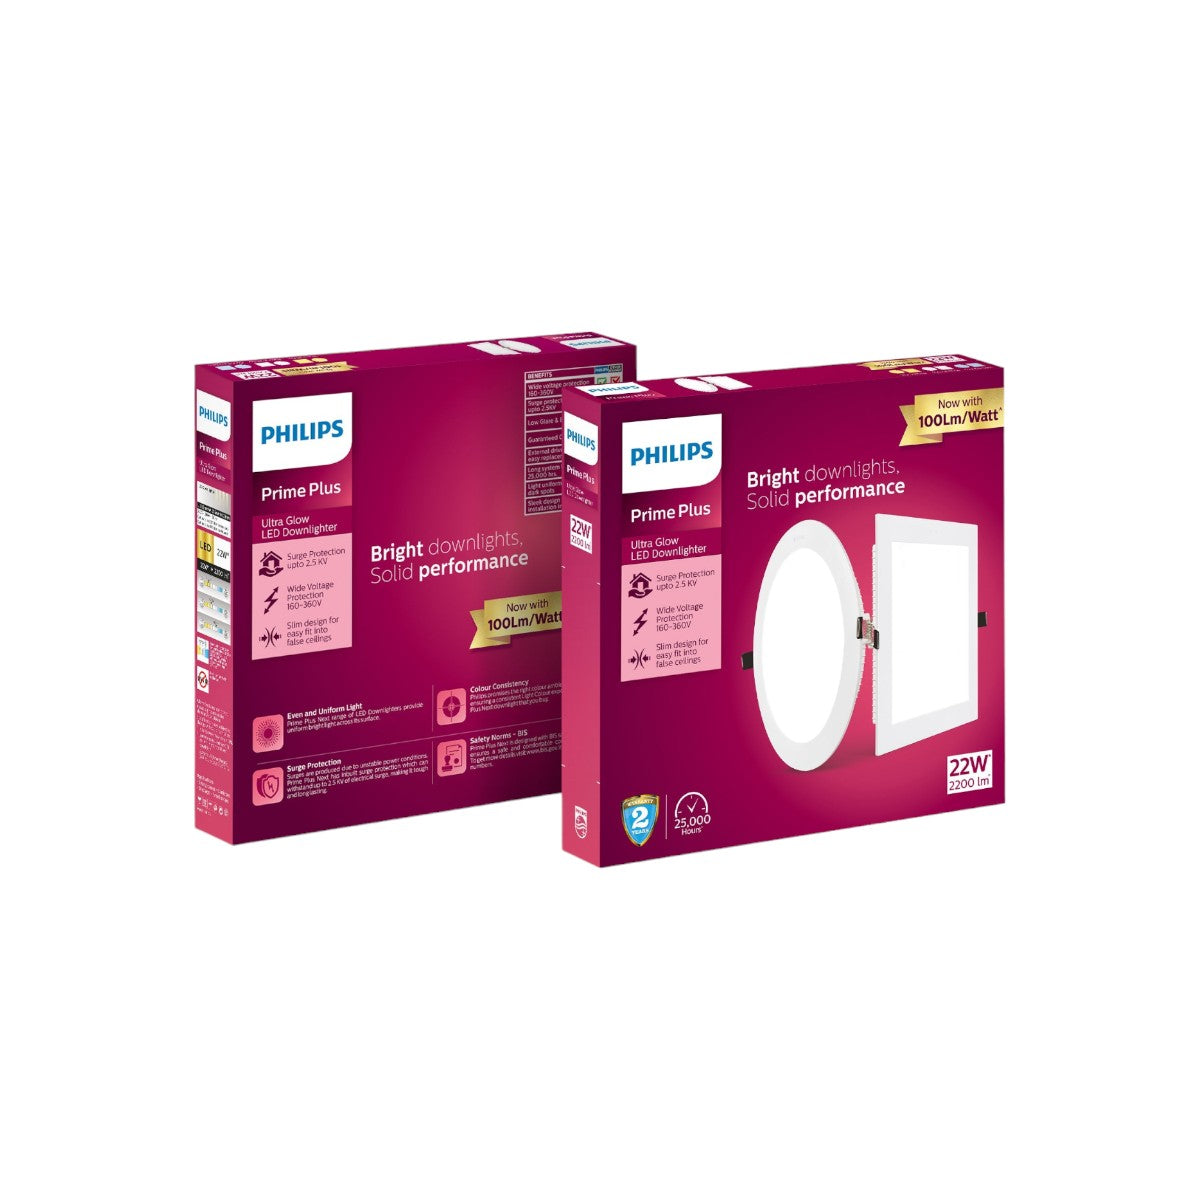 Philips Ultra Glow LED Downlight